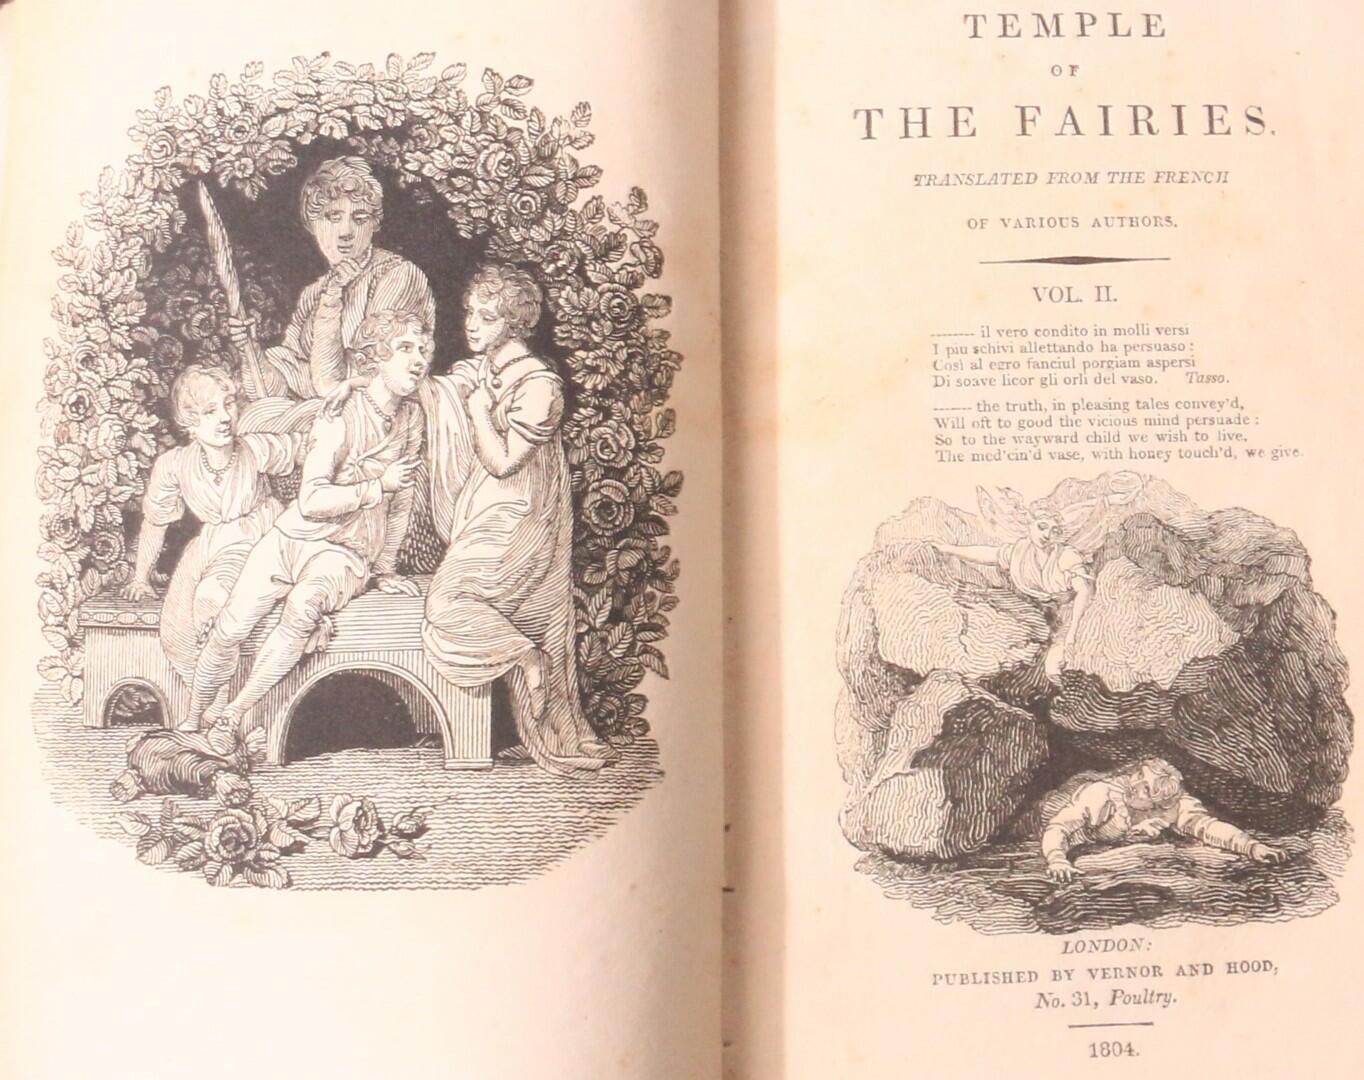 Anonymous [Madame D'Aulnoy] - Temple of the Fairies - Vernor & Hood, 1804, First Edition.